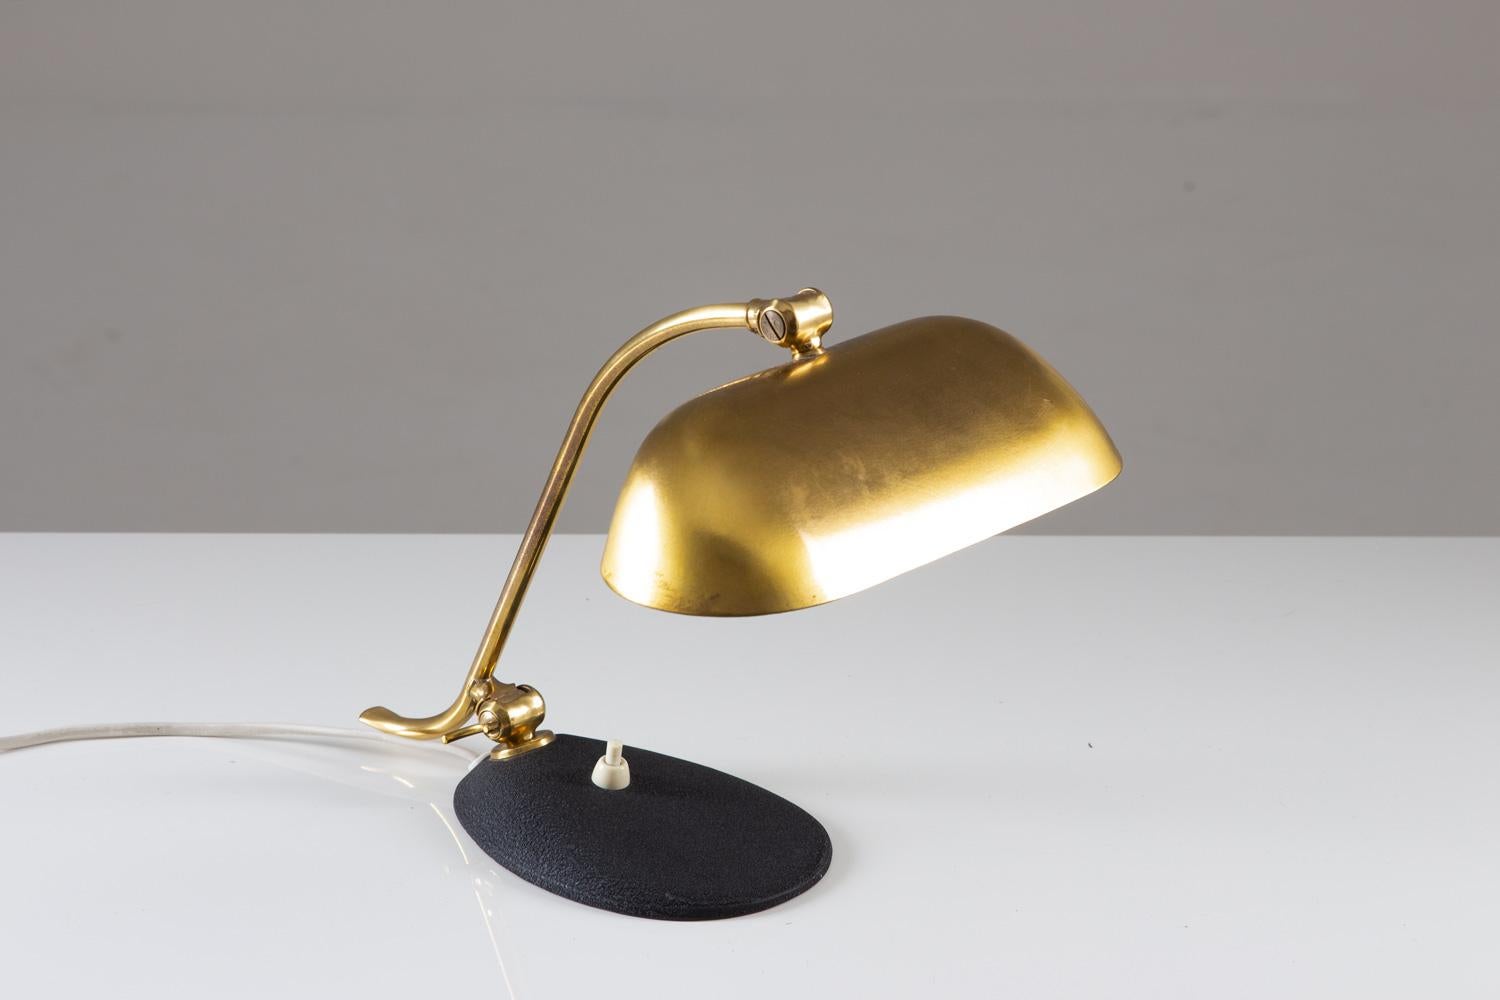 A charming desk lamp in brass produced in Sweden by unknown manufacturer. This lamp shows elegant organic lines and is of great quality.

Condition: Very good original condition. Existing functional wiring.